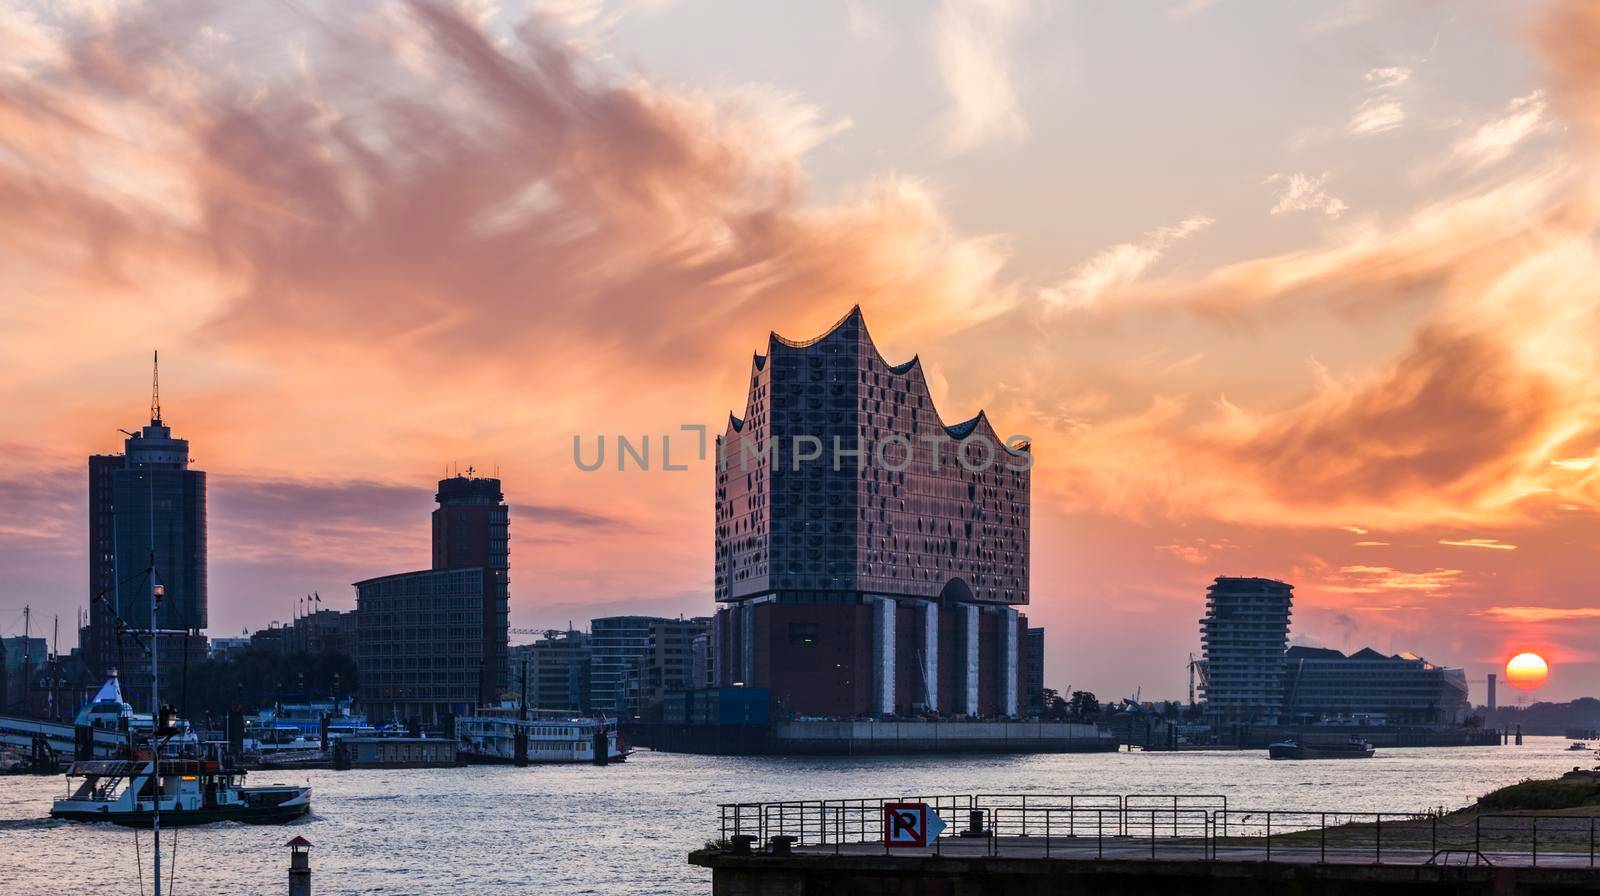 Hamburg architecture across the river at sunrise by benkrut